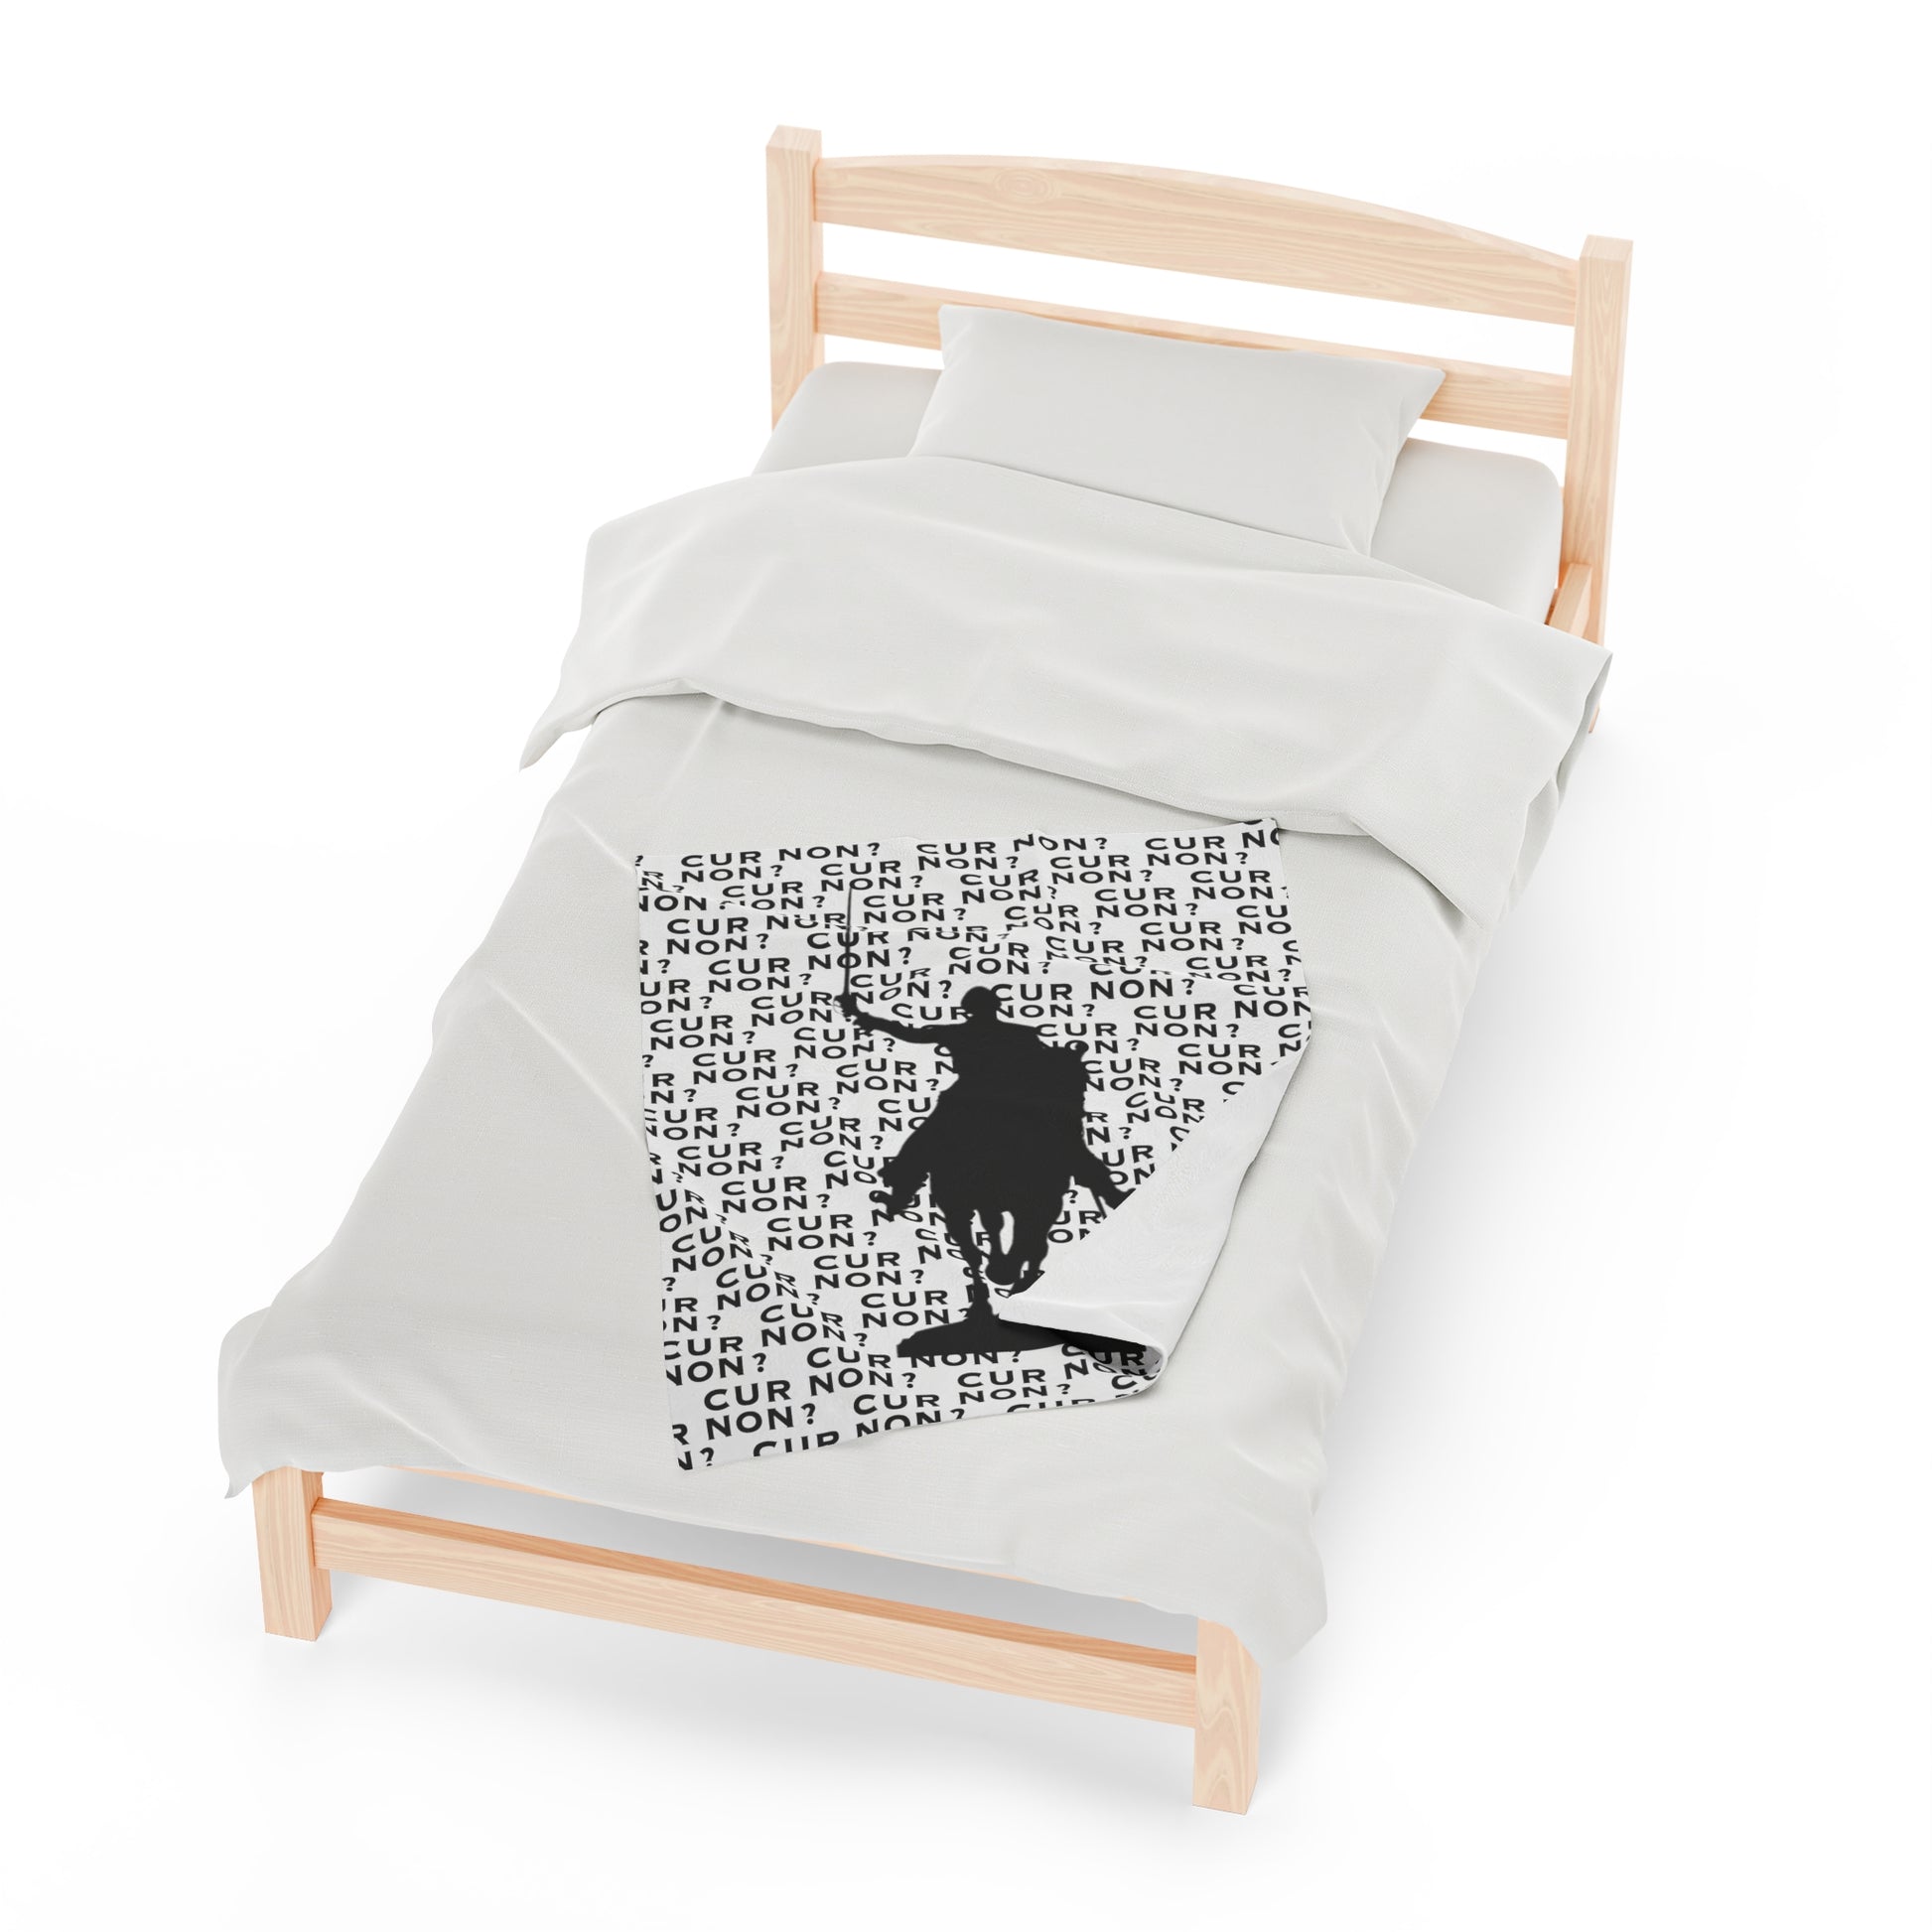 lafayette blanket Marquis de Lafayette silhouette and cur non motto on a blanket in black and white